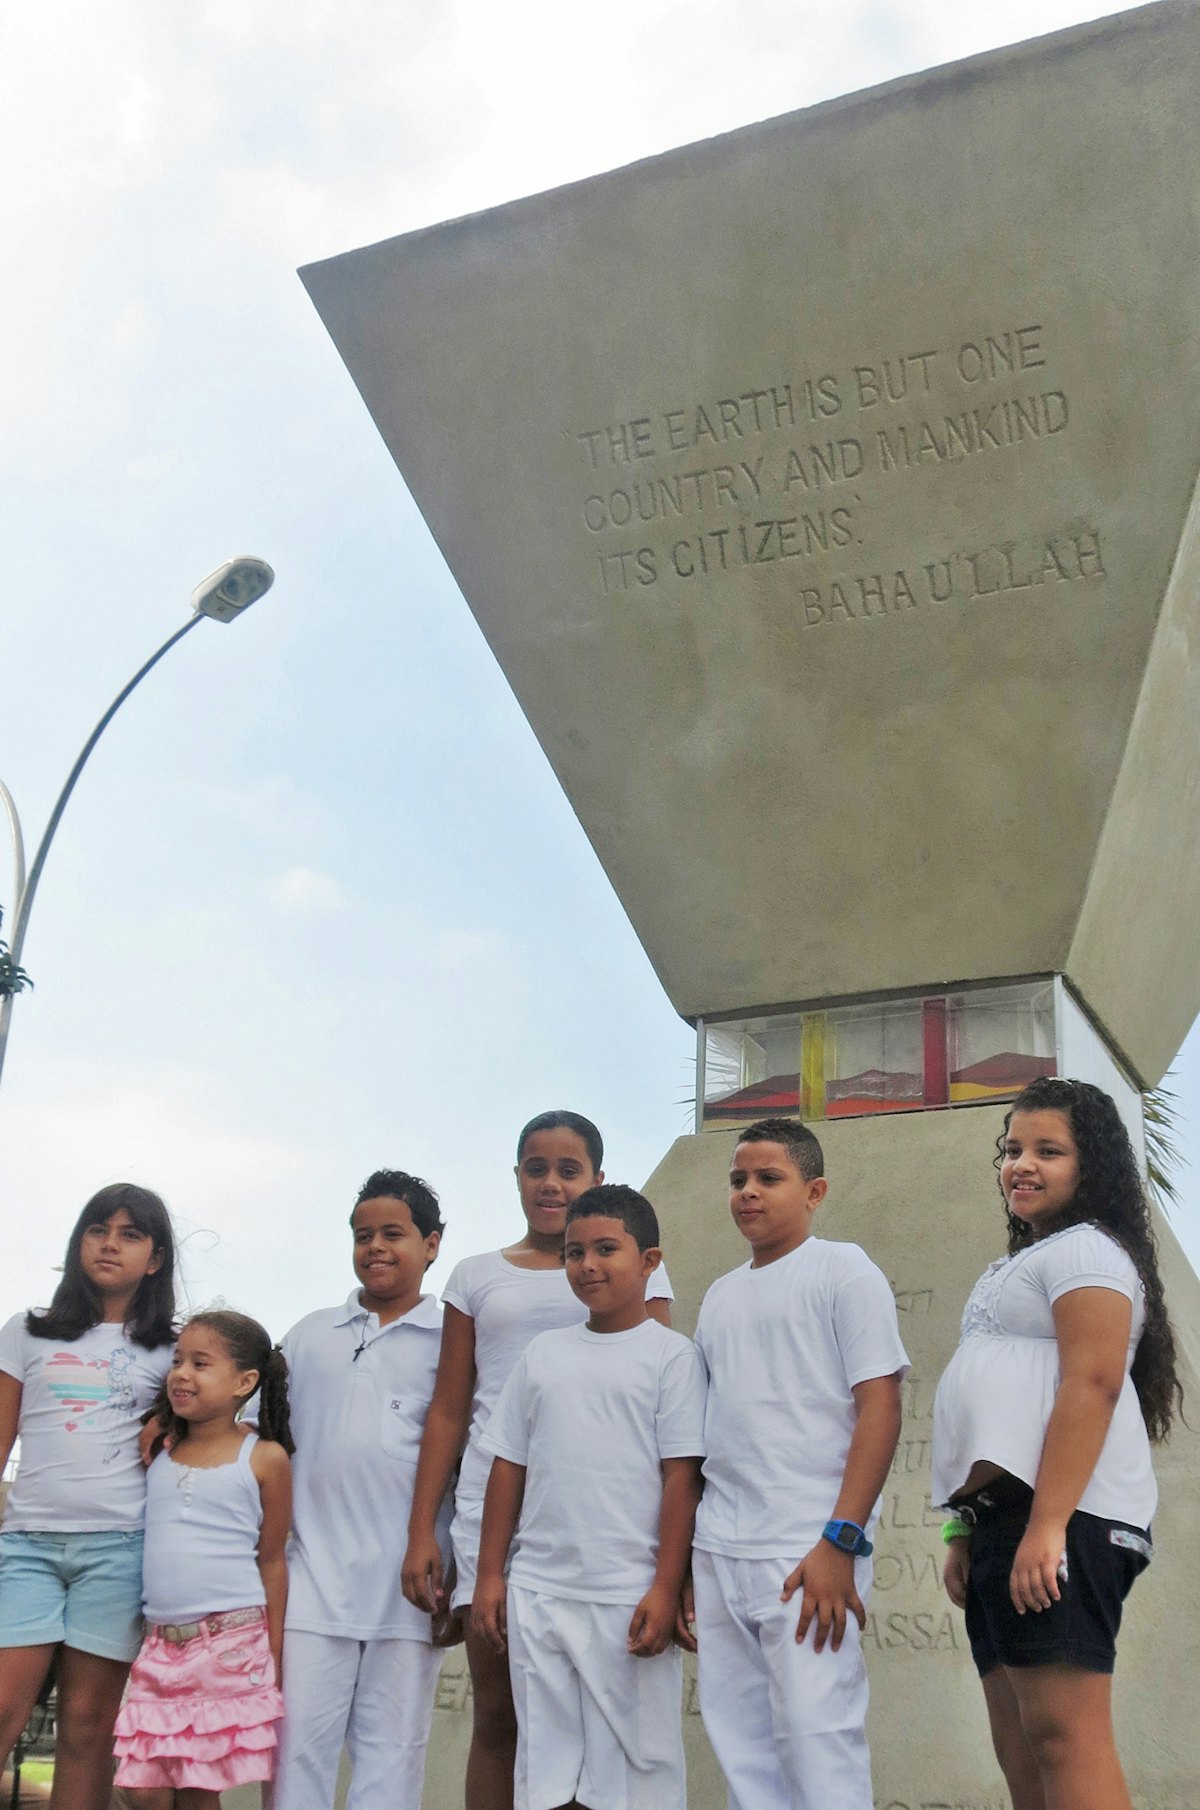 An hourglass-shaped 'Peace Monument" in Rio bearing the words of Baha'u'llah was re-dedicated on 17 June 2012. The monument was an initiative of the Baha'i International Community and the Baha'i community of Brazil for the 1992 Earth Summit. More than 100 people attended the ceremony including the UN Secretary-General for Rio+20 Sha Zukang, the monument's designer Siron Franco, and Eduardo Paes - mayor of Rio.